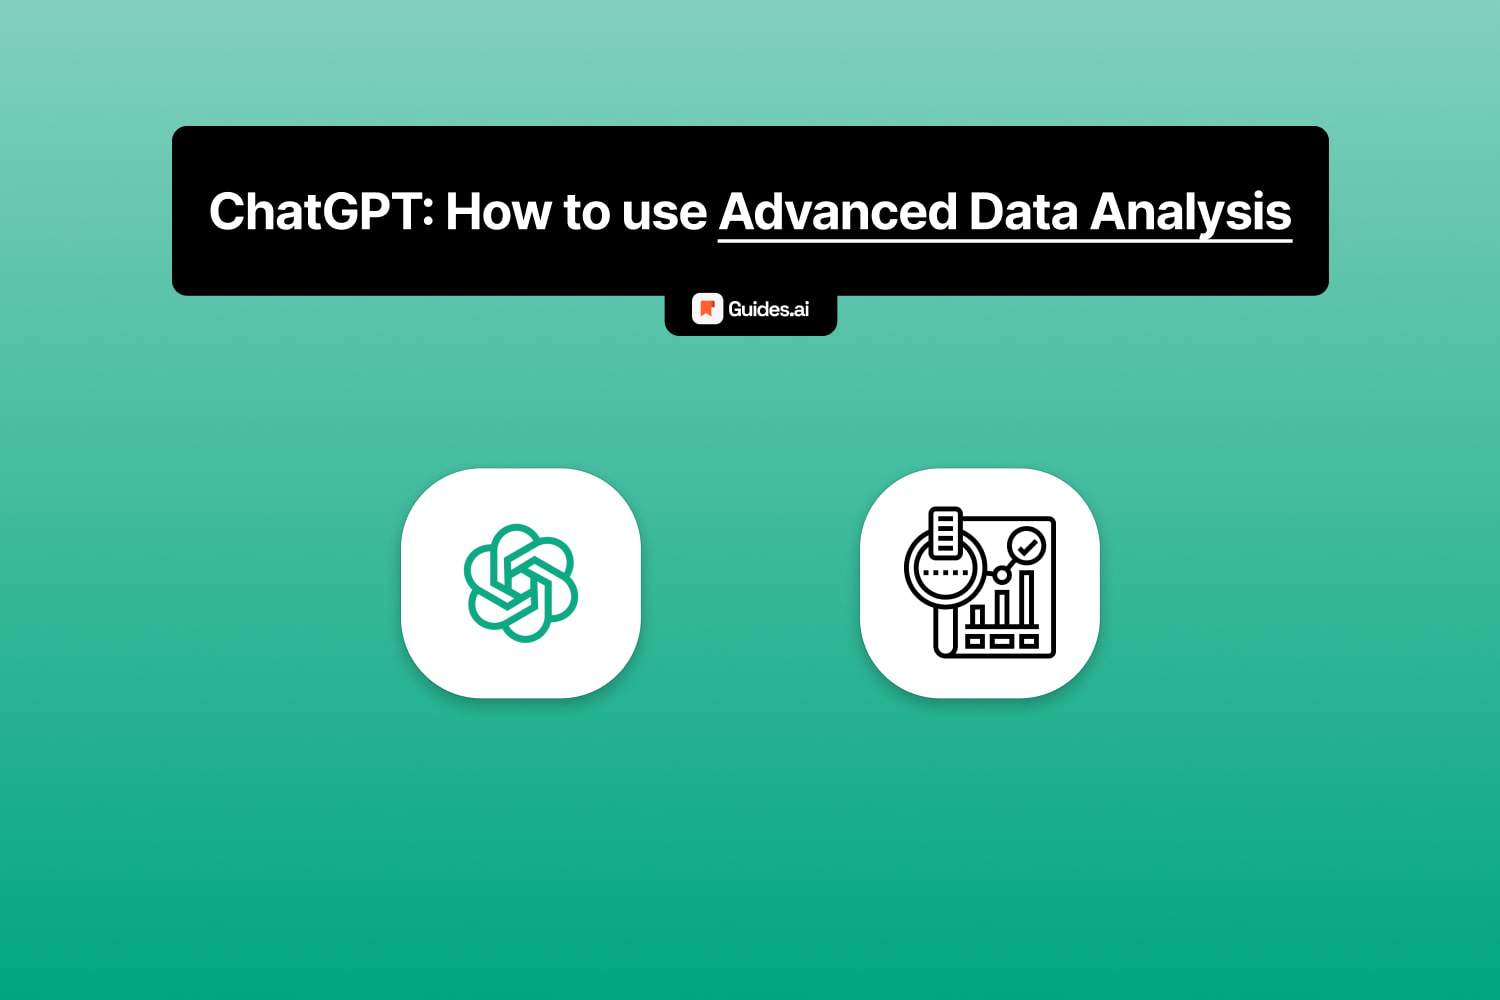 How to use ChatGPT Advanced Data Analysis